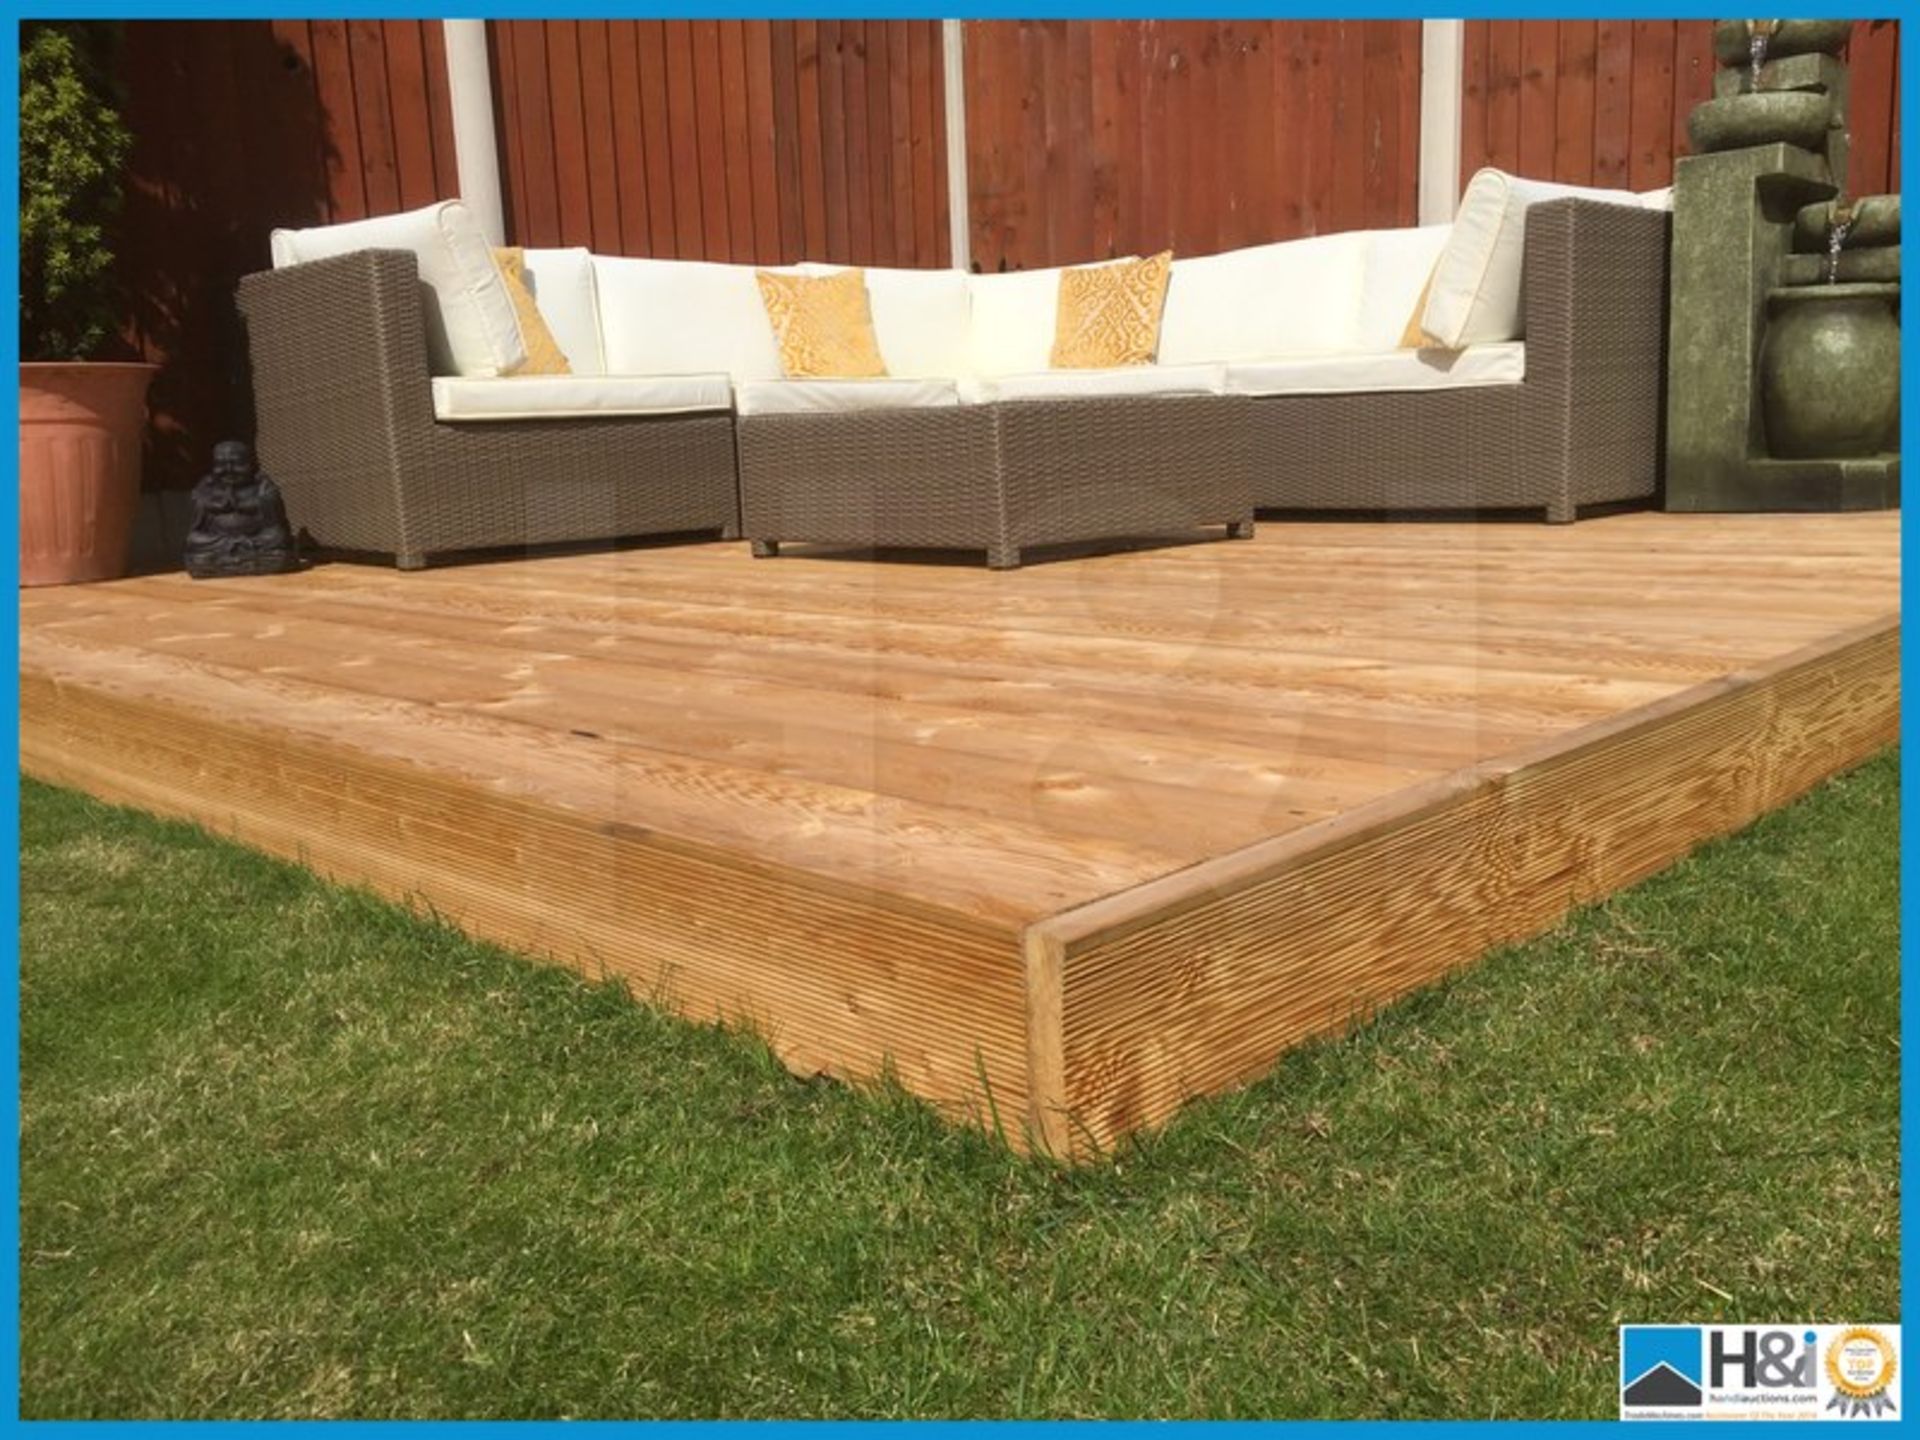 45 LENGTHS OF QUALITY 32x150LARCH DECKING IN 4 METRE LENGTHS ENOUGH TO COVER 26m2 Appraisal: Viewing - Image 2 of 6